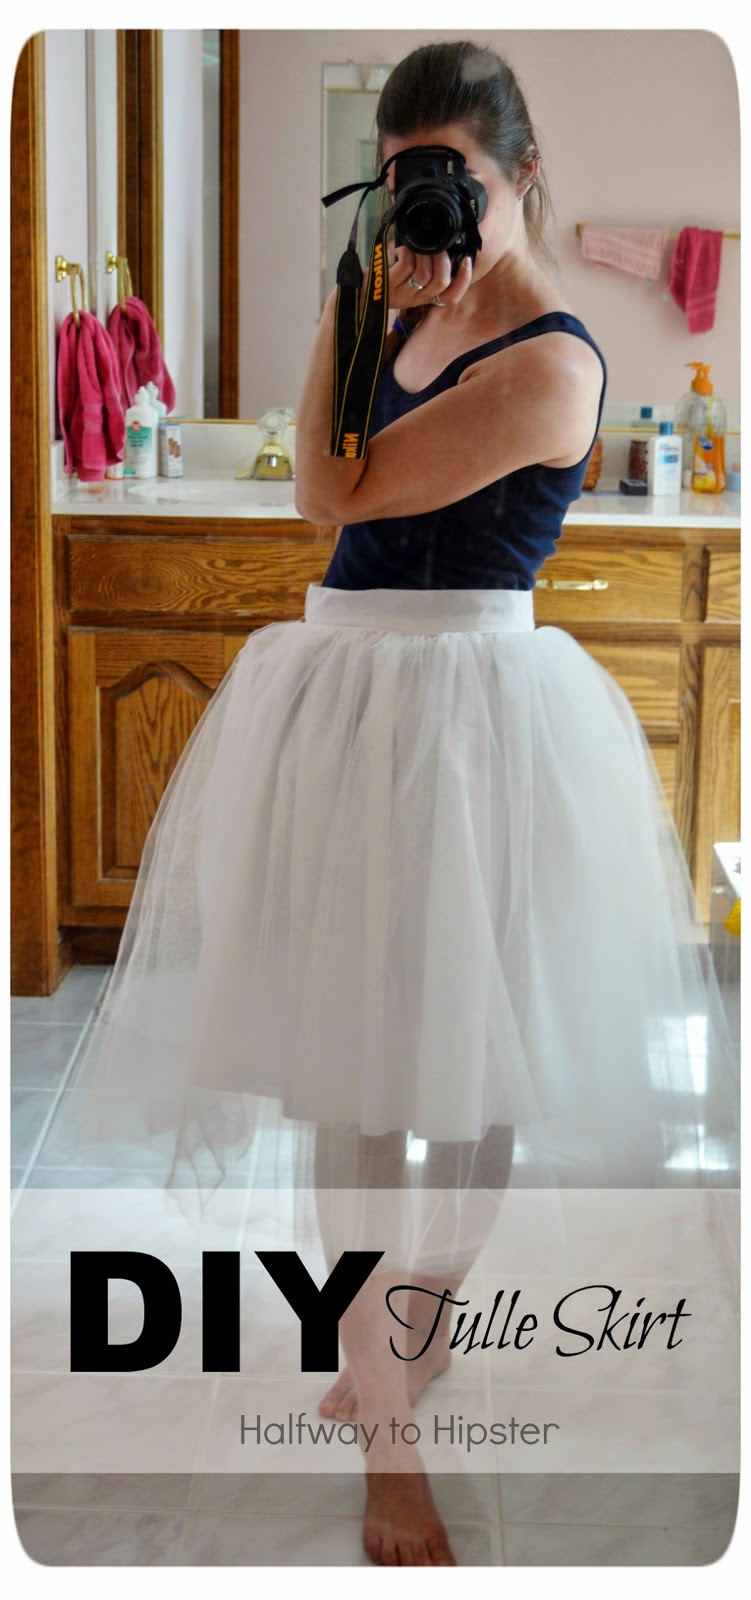 Halfway To Hipster: DIY Tulle Skirt